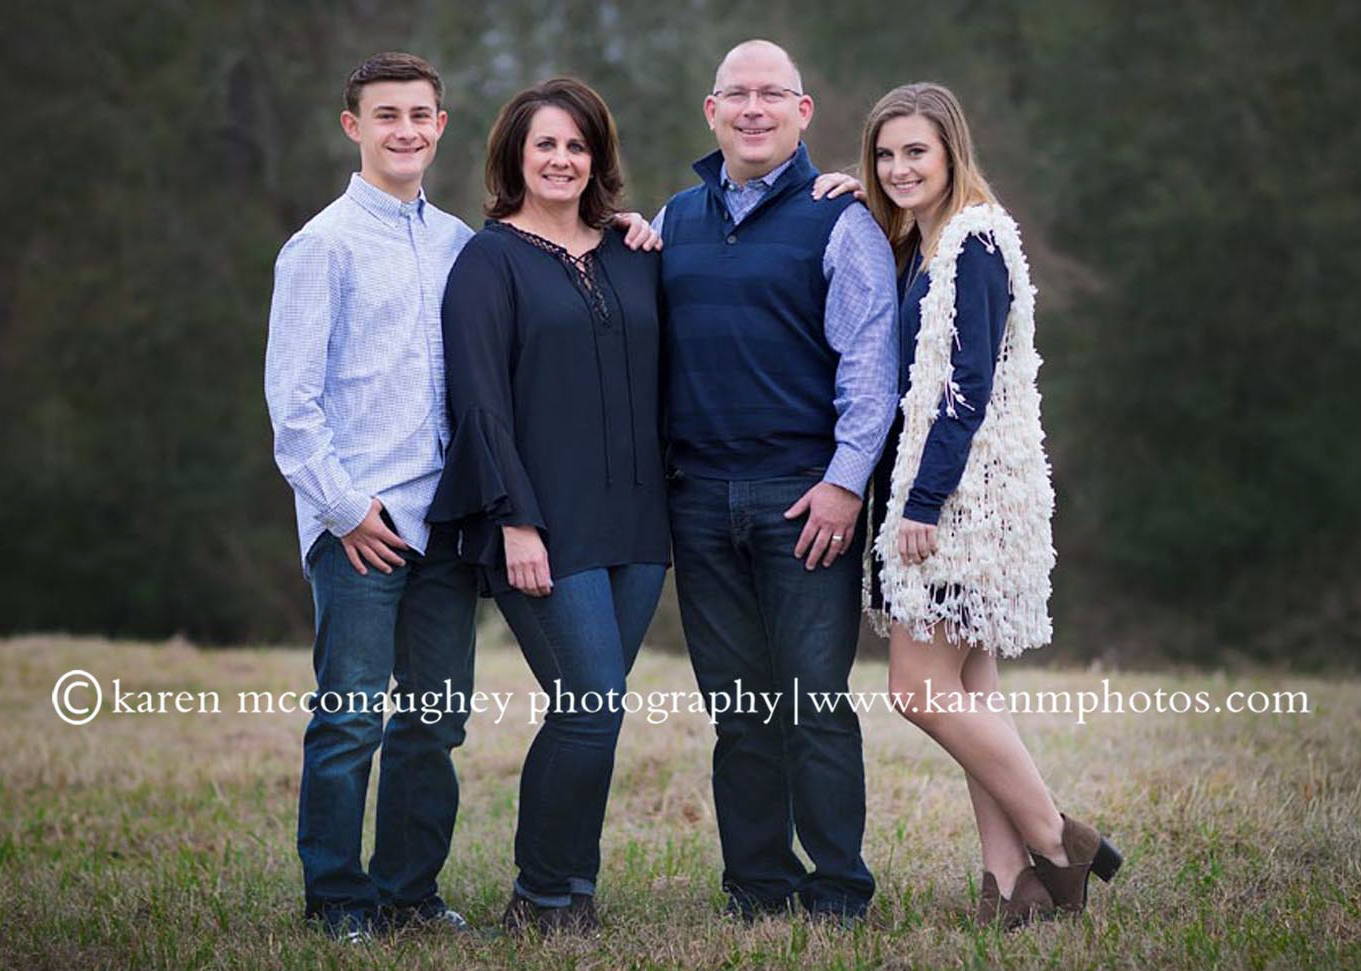 Baby, it's cold outside....The Sterns Family; Cypress, Texas Karen McConaughey Photography